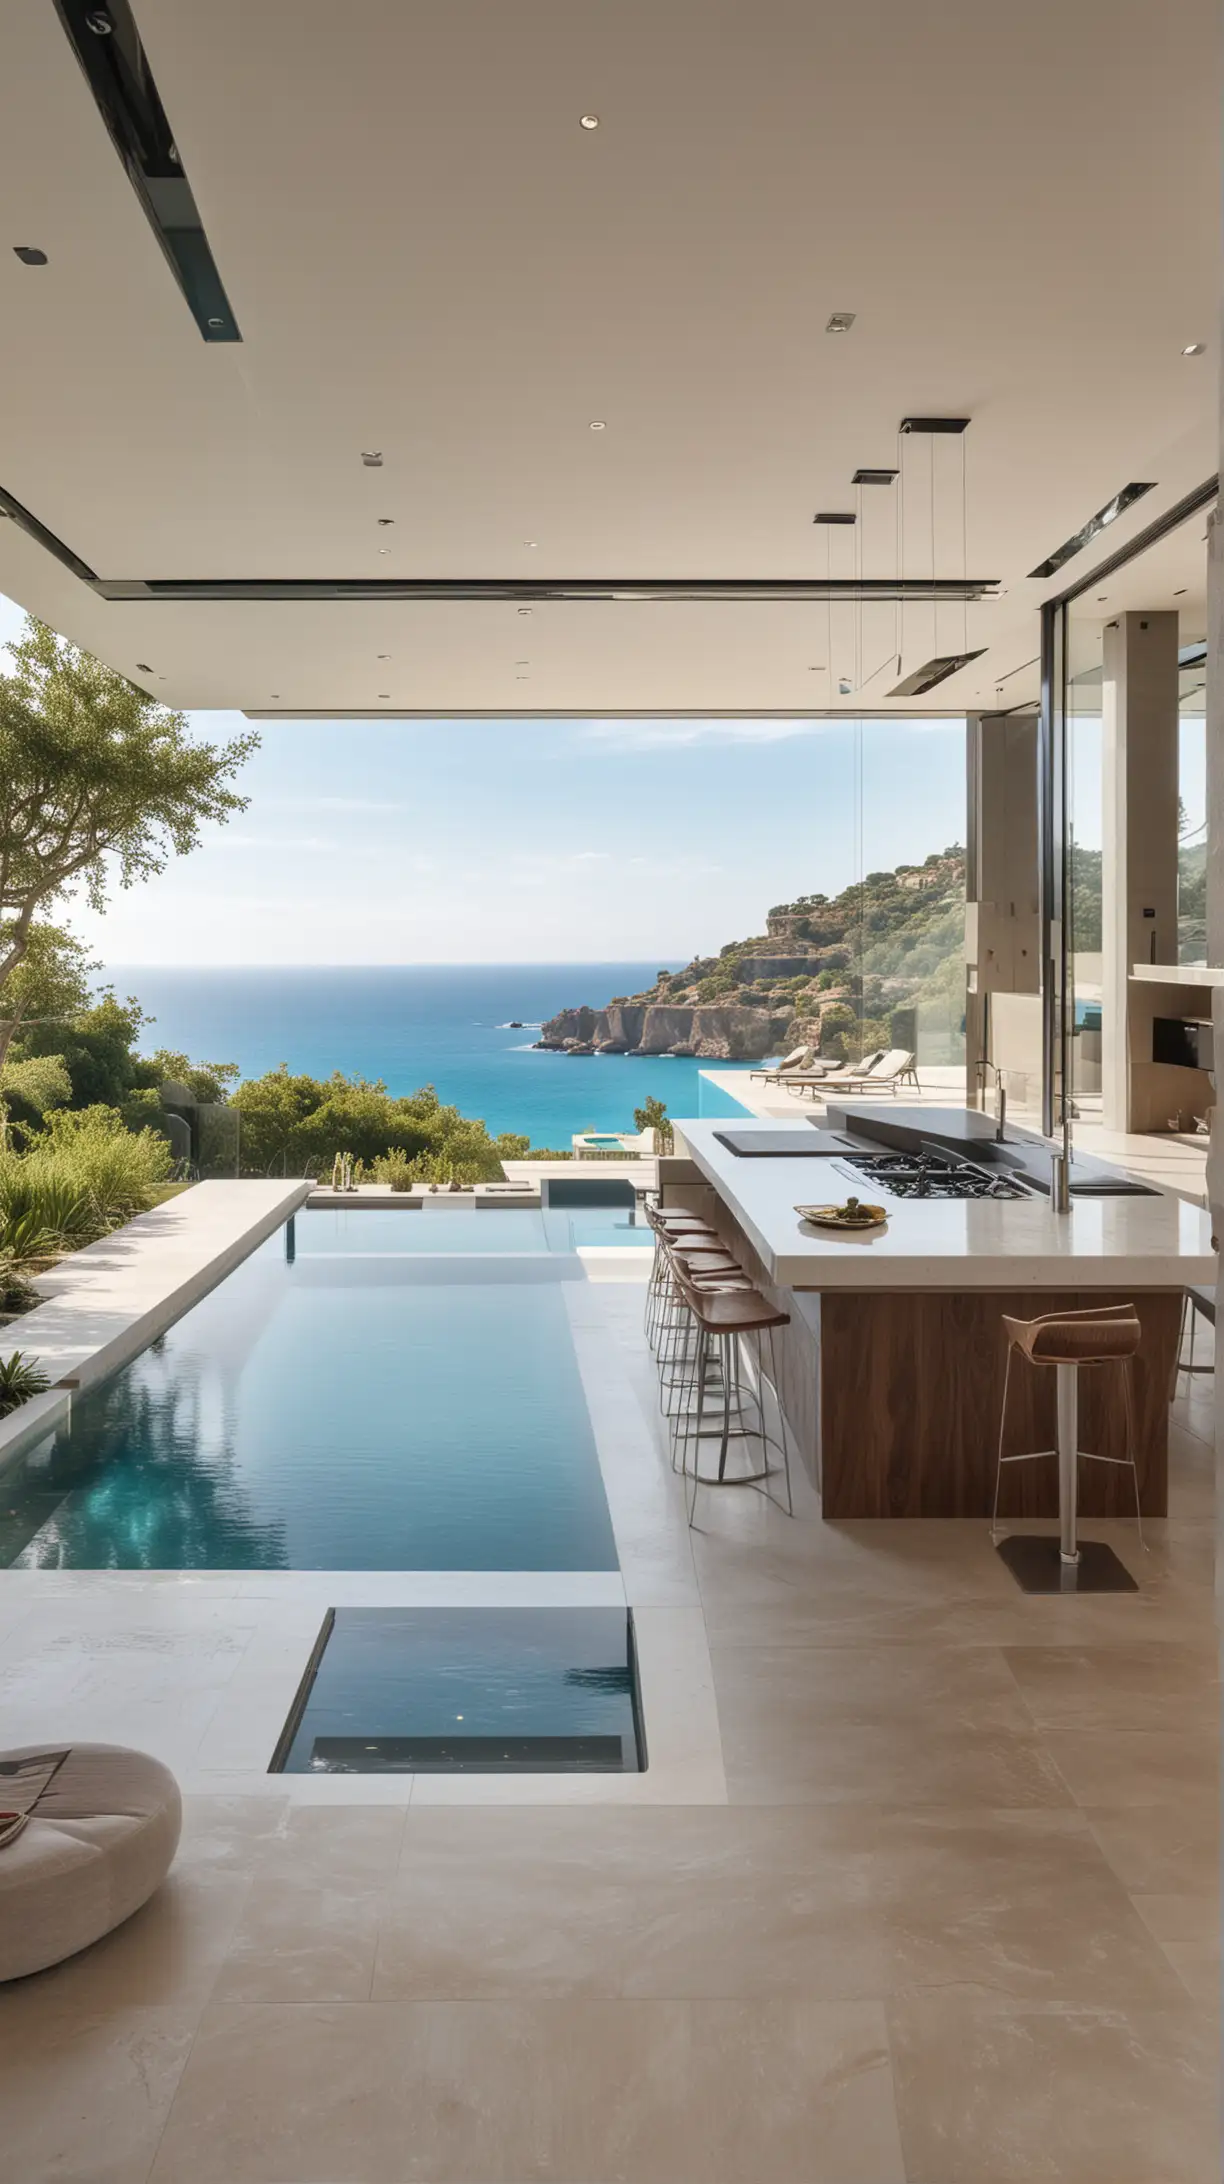 Contemporary Minimalist Living Space with Infinity Pool and Architectural Elegance